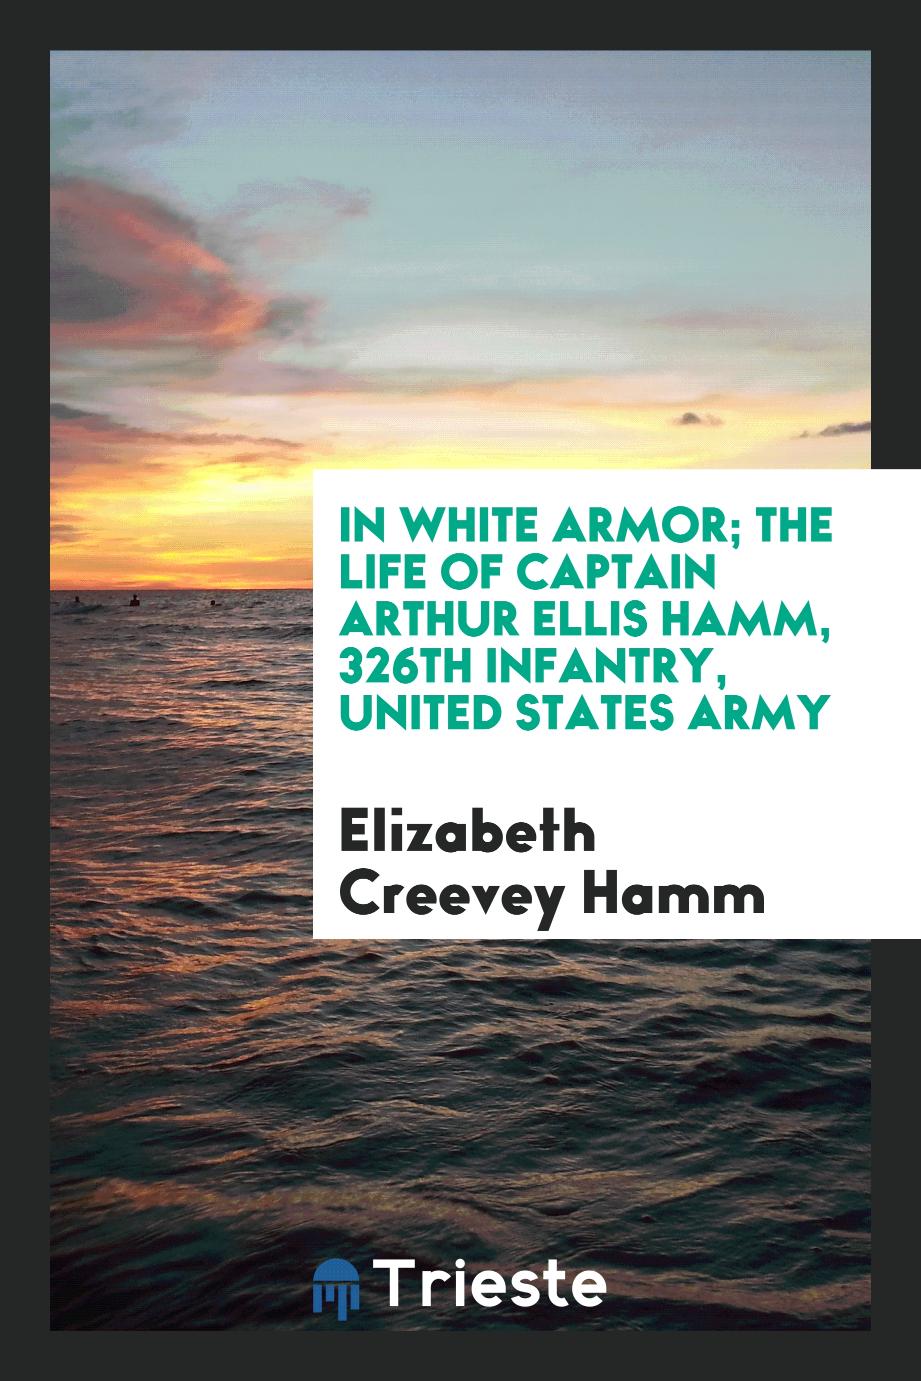 In white armor; the life of Captain Arthur Ellis Hamm, 326th infantry, United States army